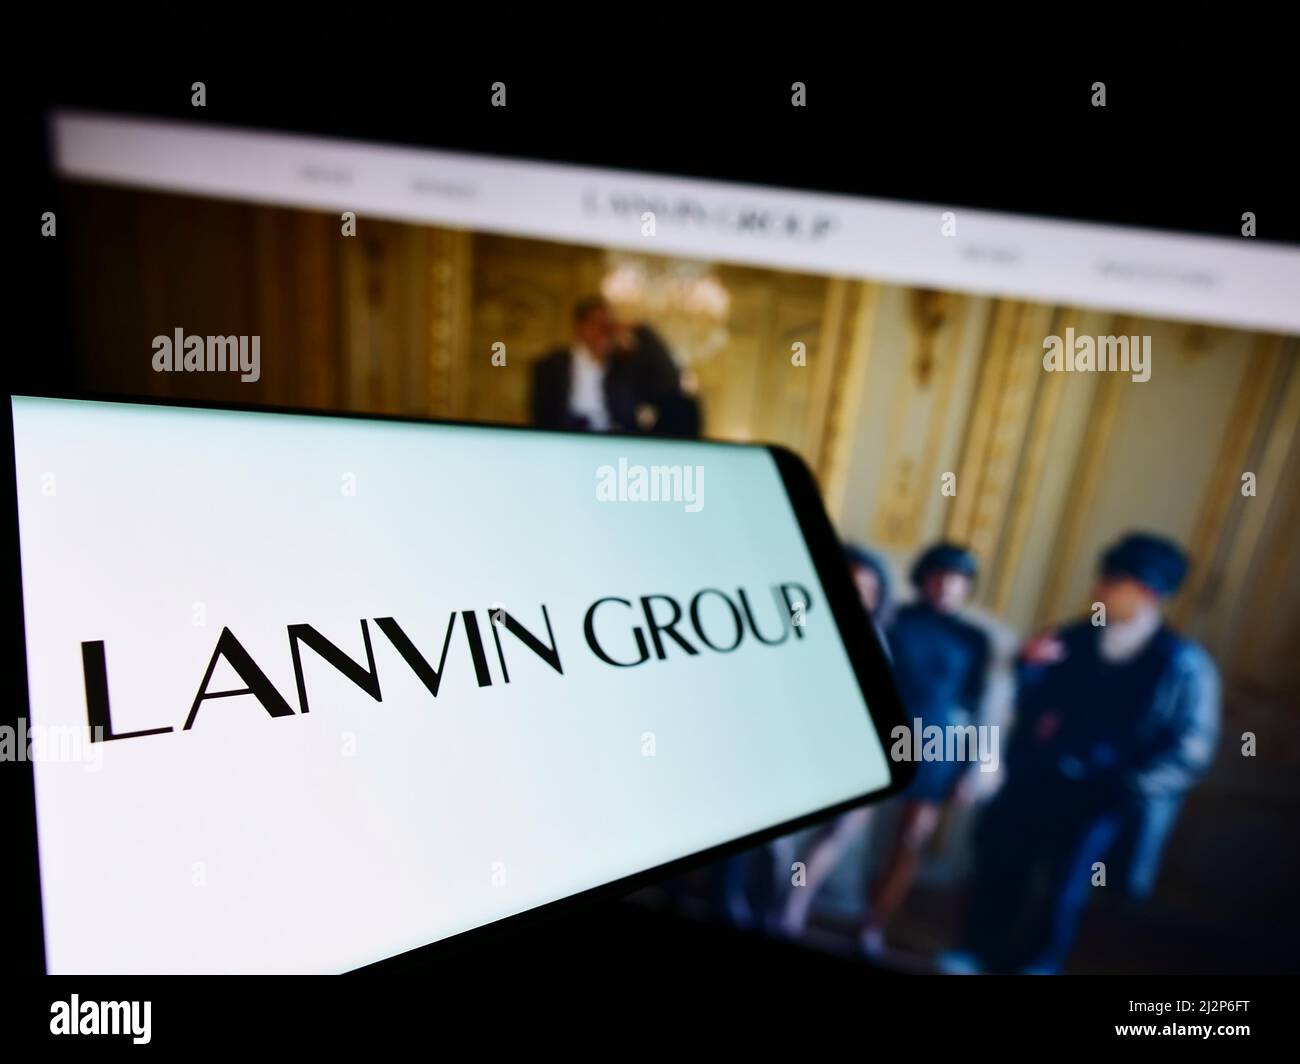 Smartphone with logo of Chinese fashion company Lanvin Group on screen in front of business website. Focus on left of phone display. Stock Photo